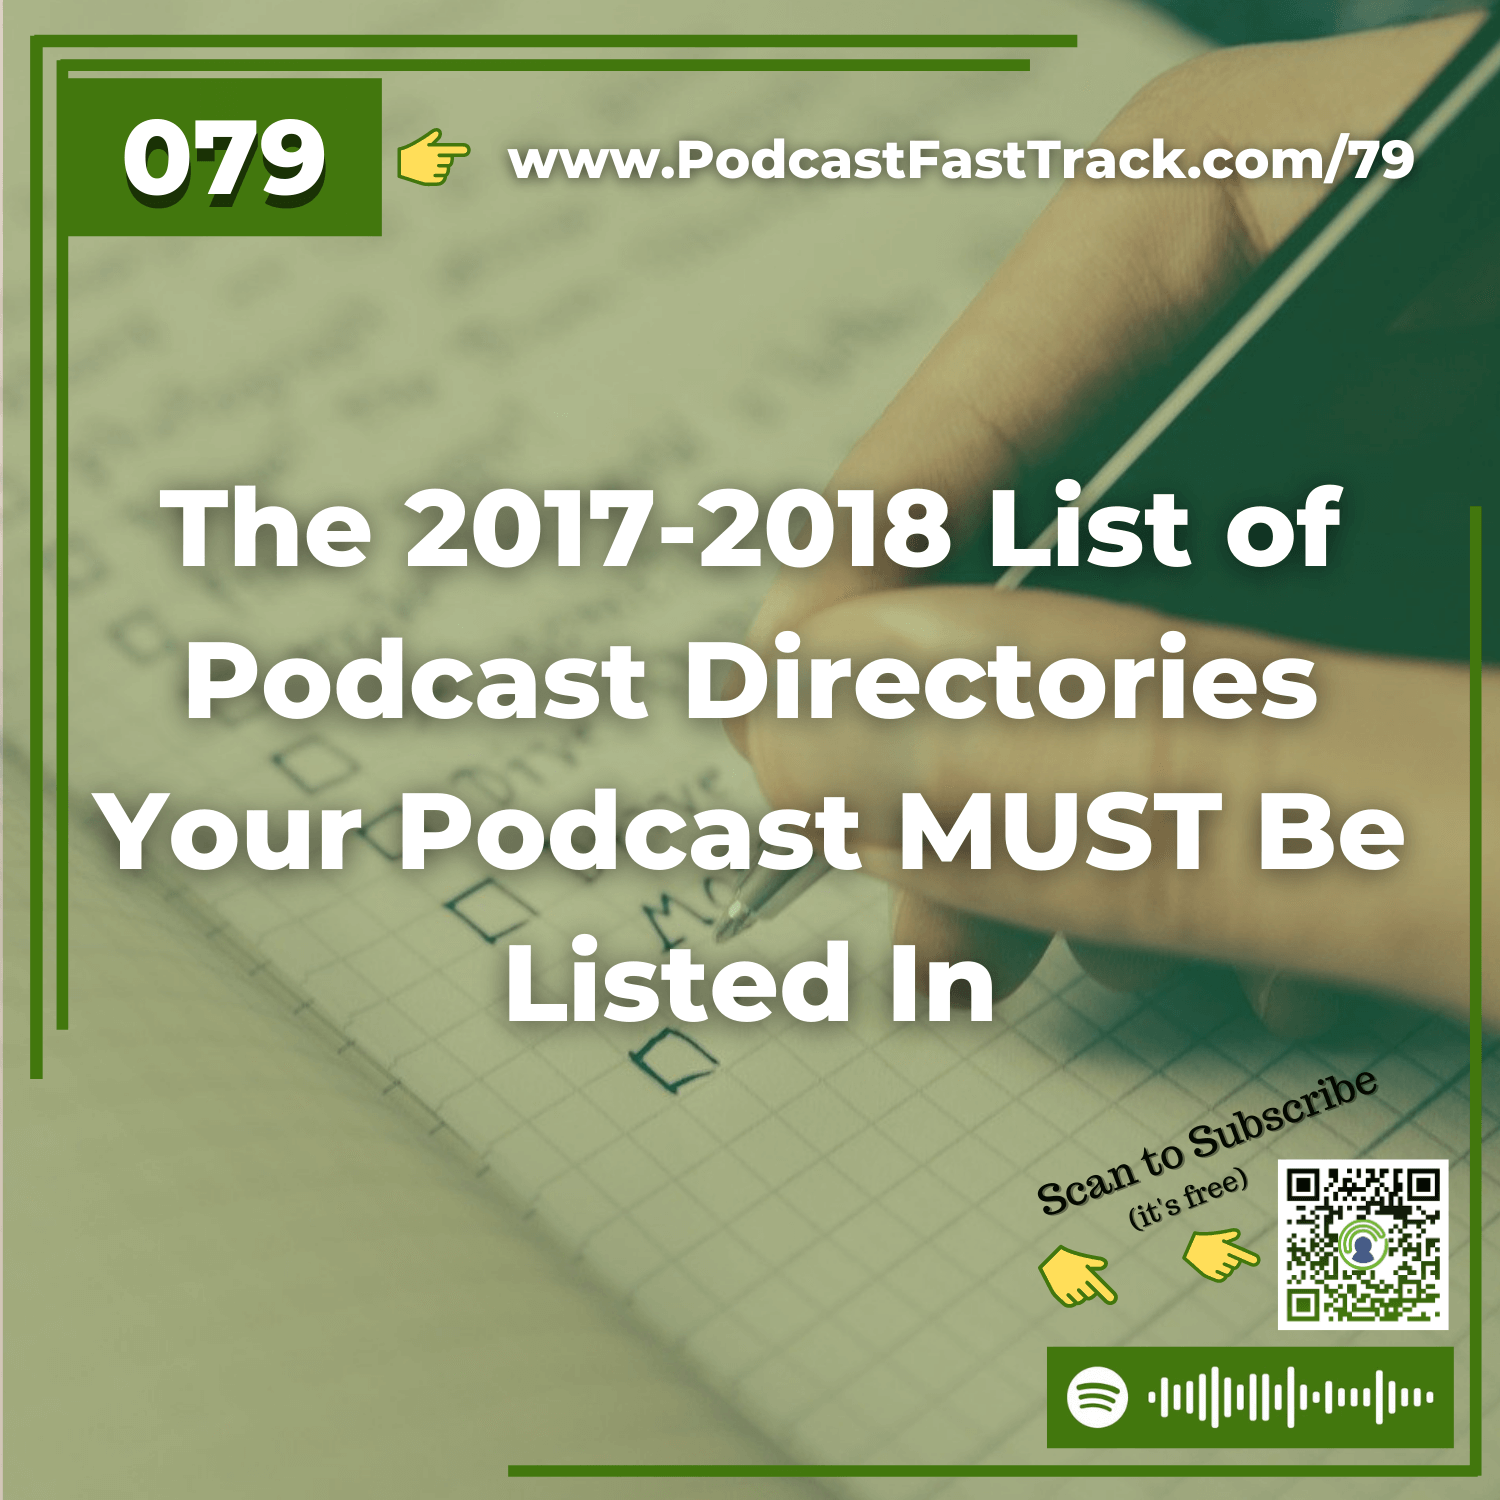 79: The 2017-2018 List of Podcast Directories Your Podcast MUST Be Listed In